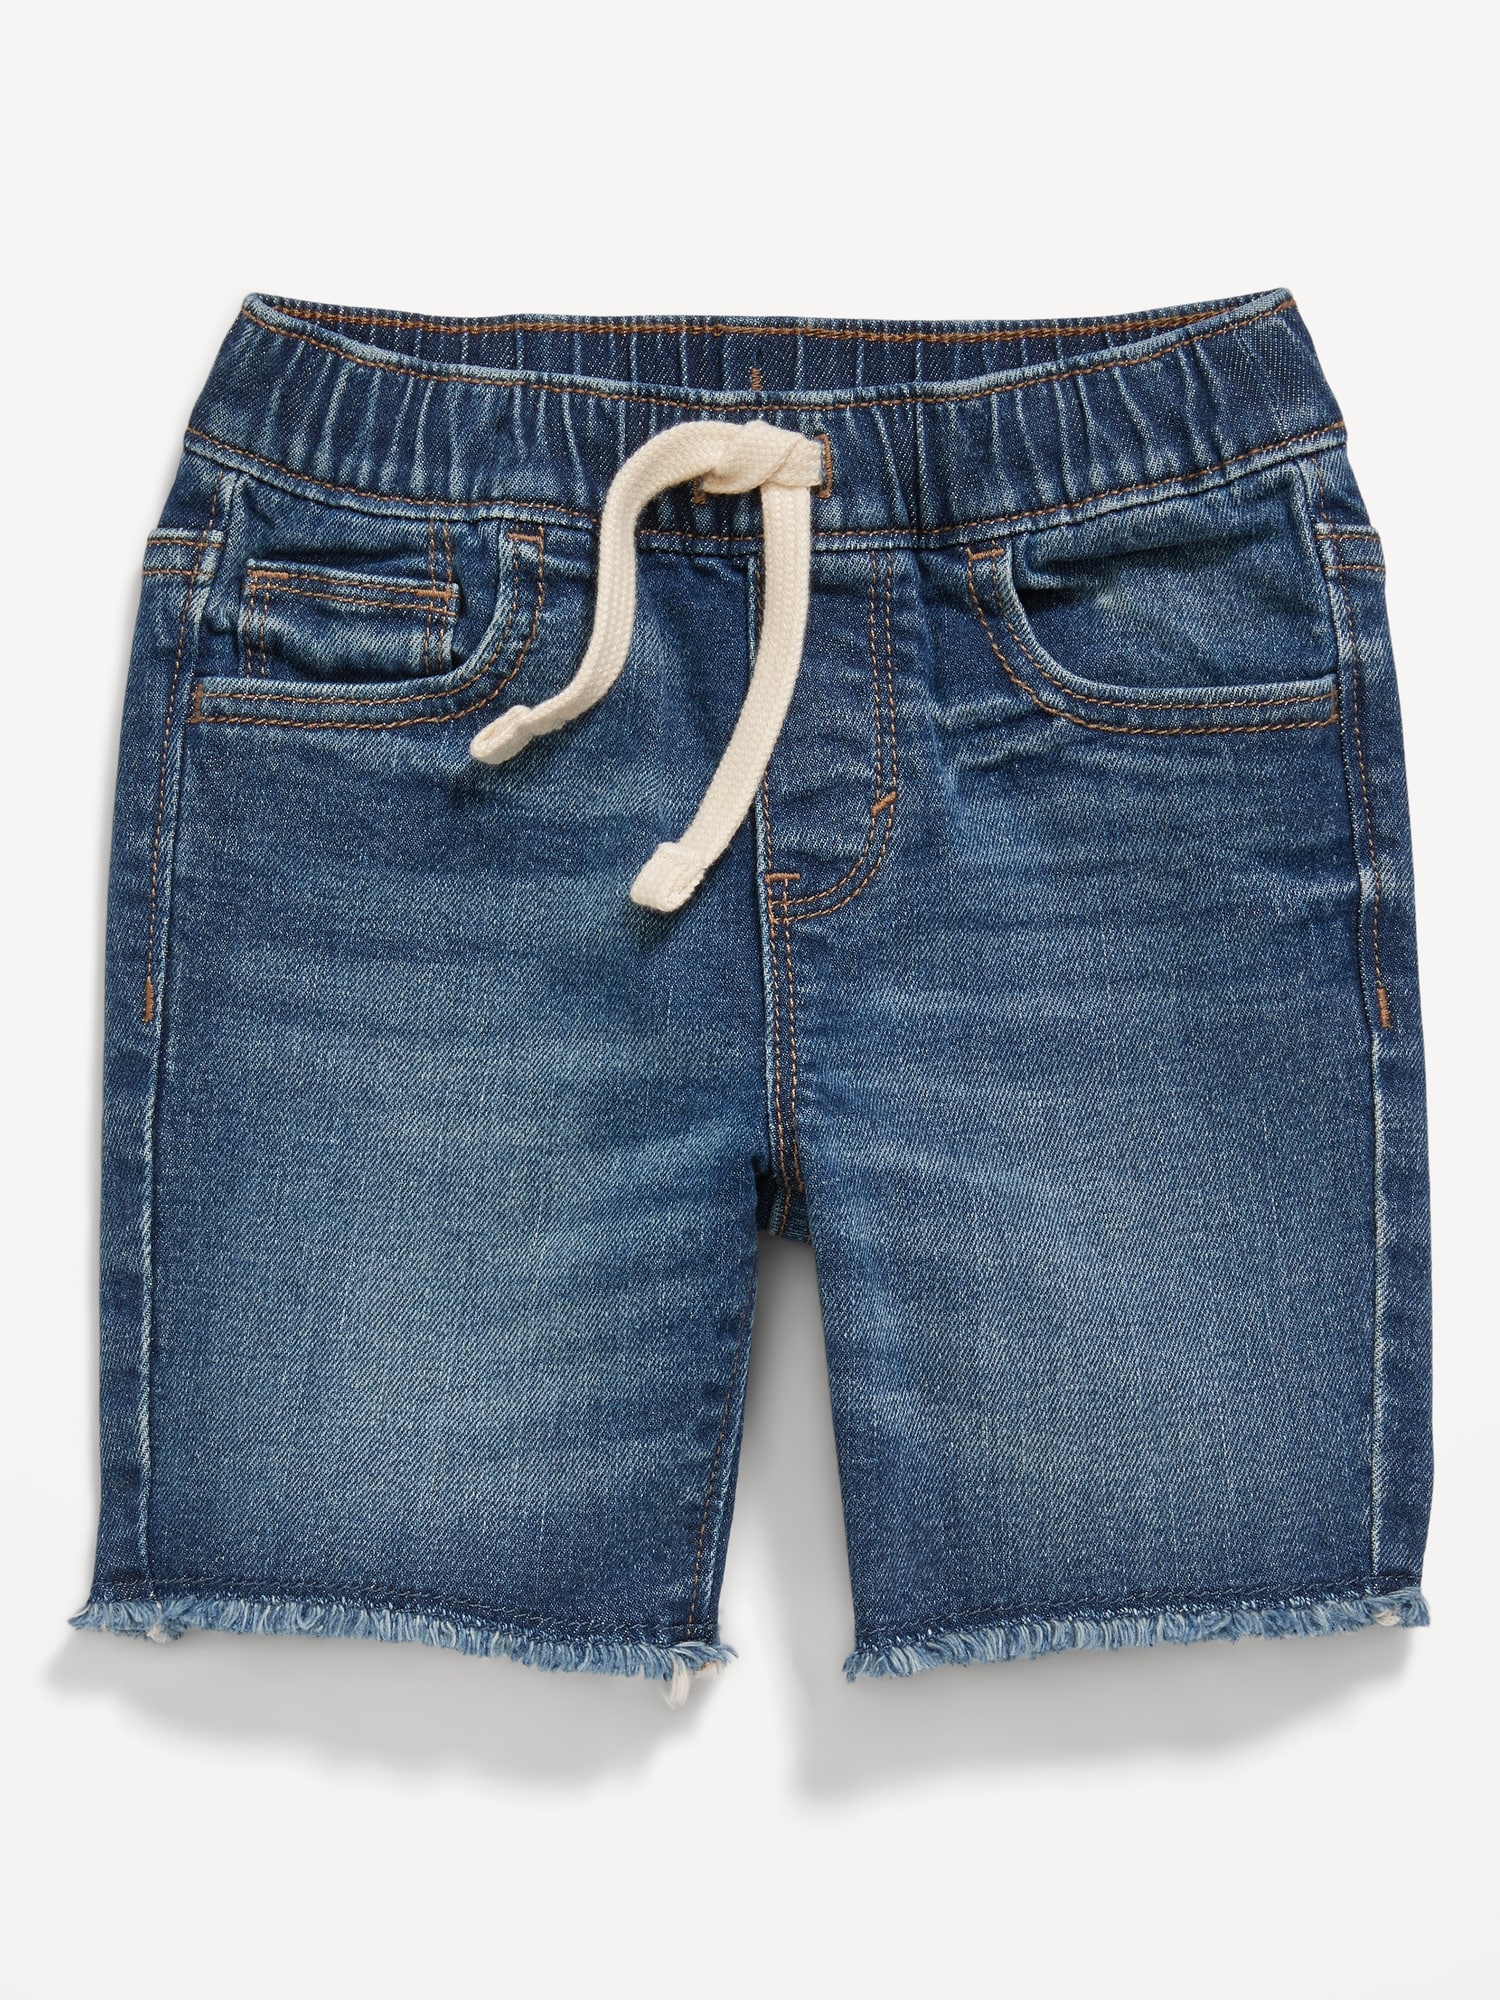 Toddler Boy Shorts with Adjustable Waist